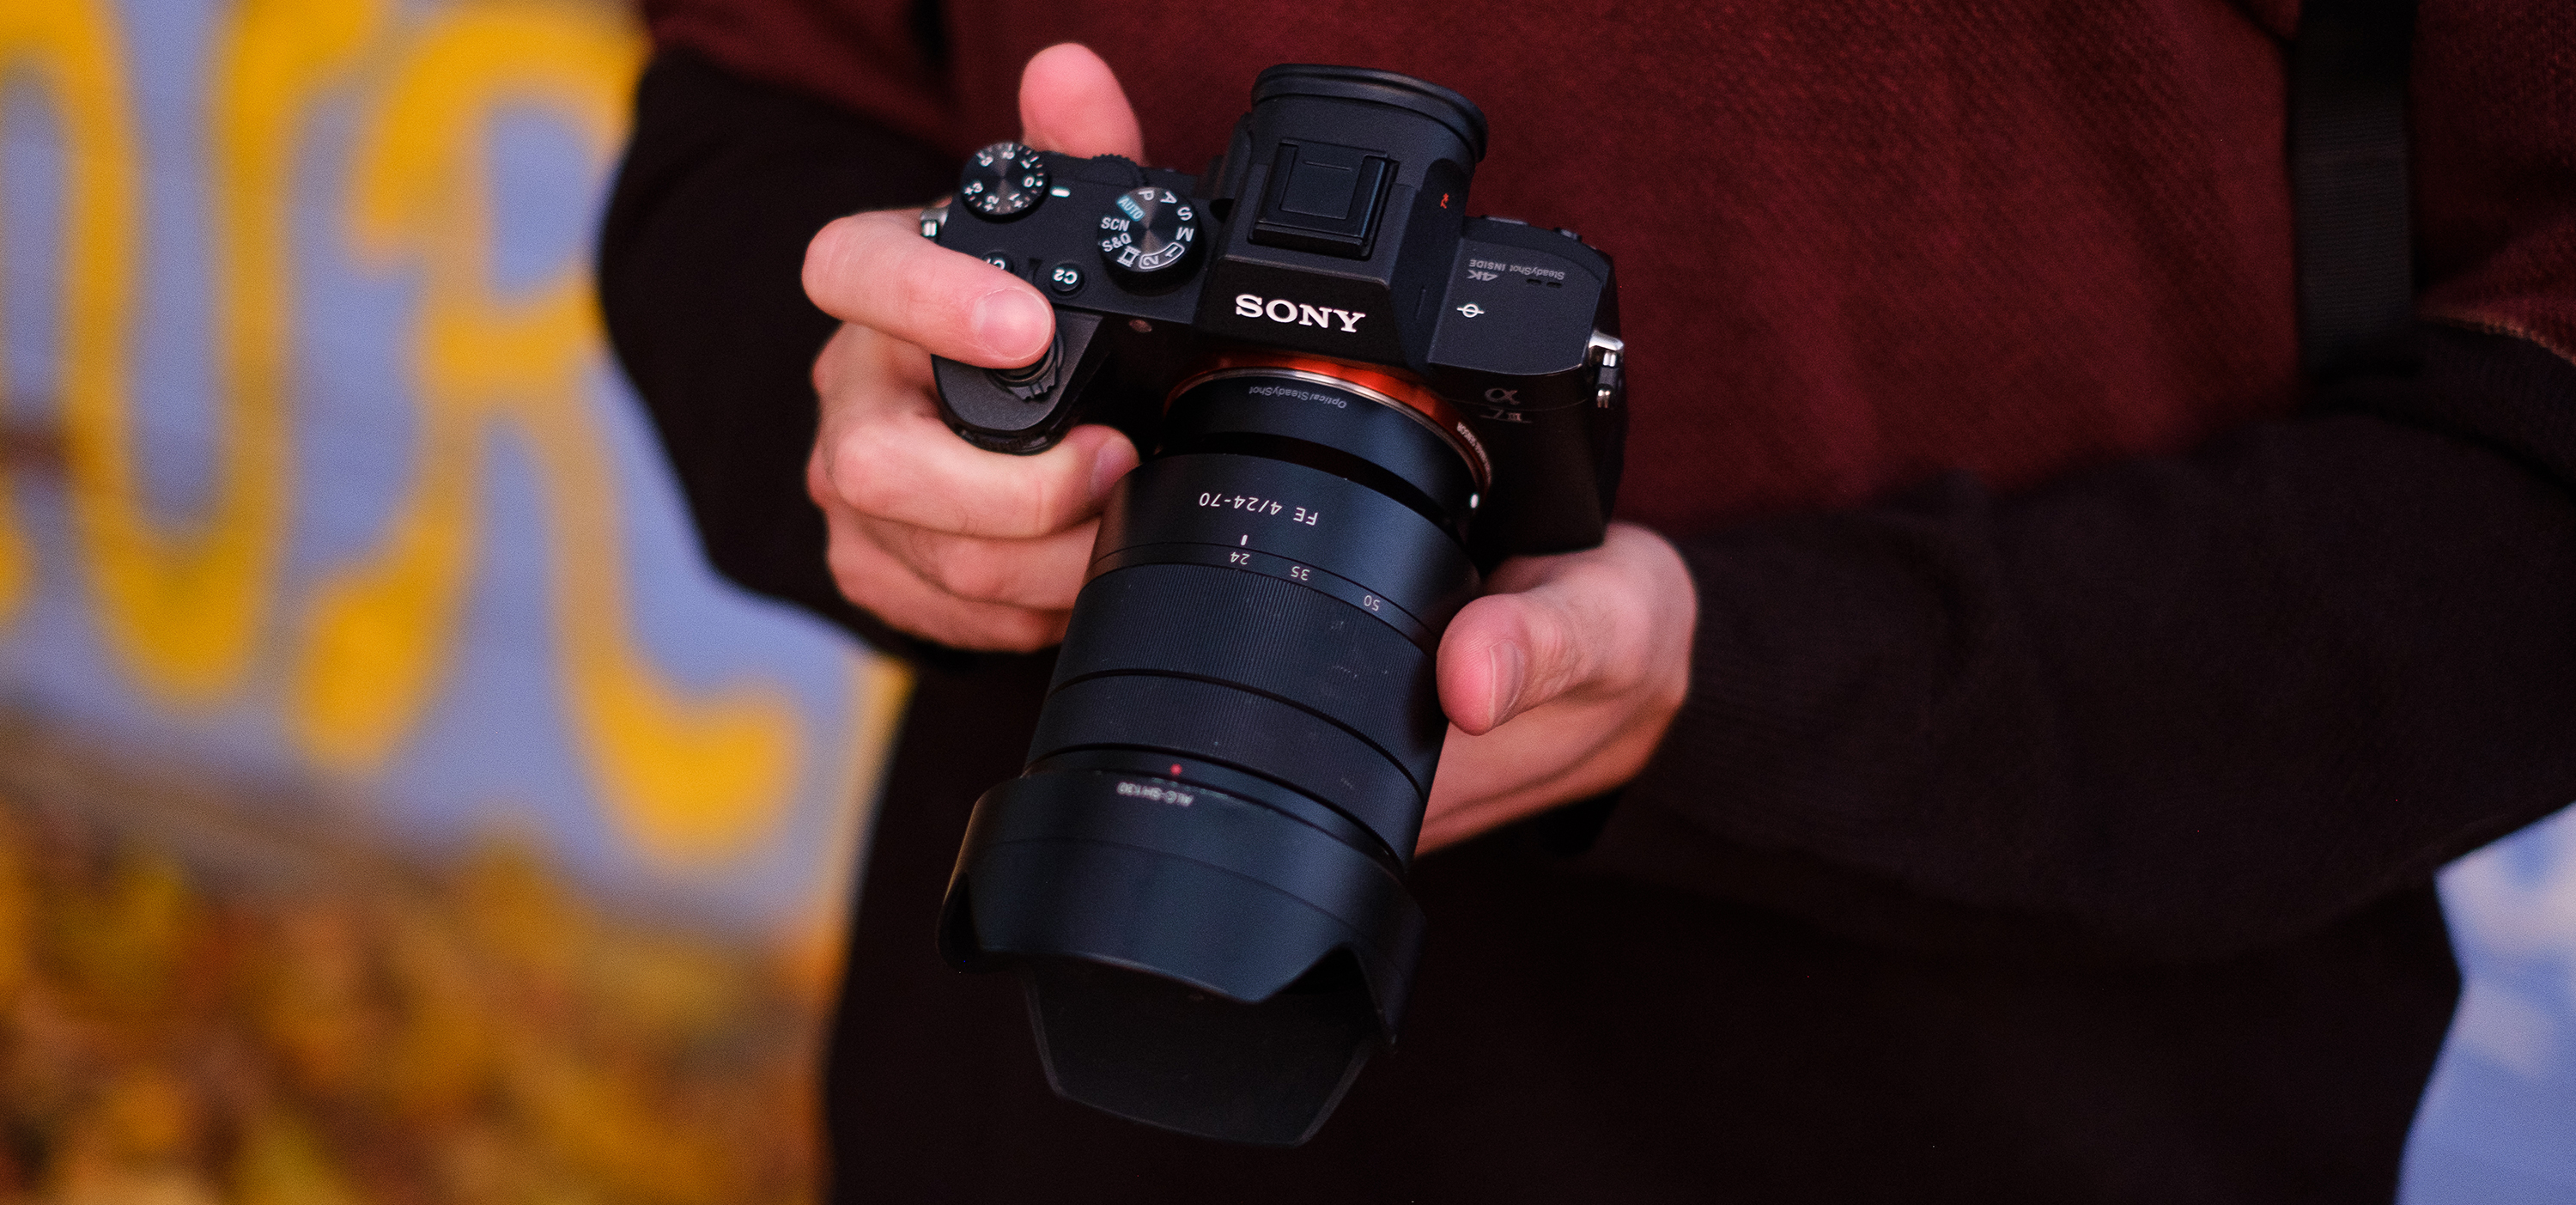 Sony A7 III Outdoor Package